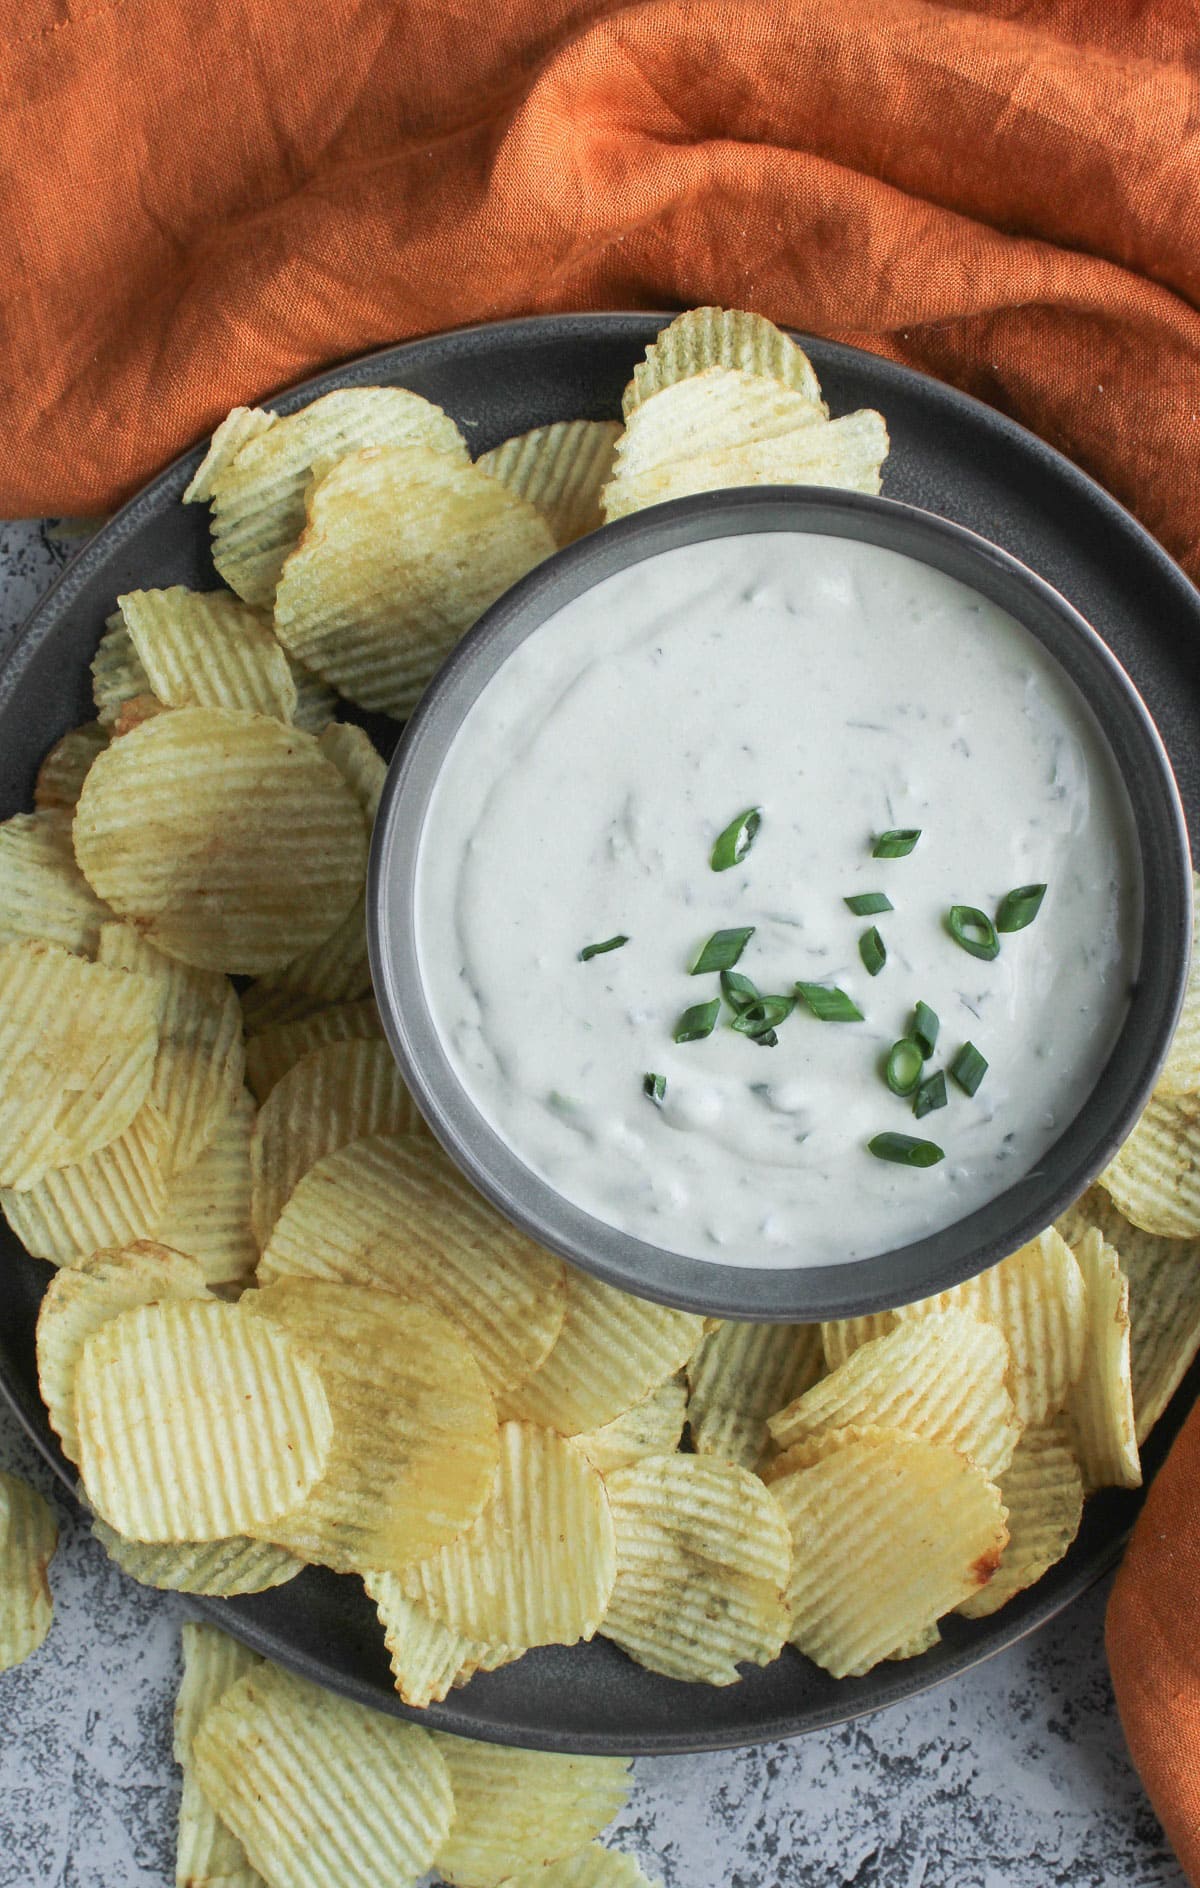 Green onion dip in a bowl garnished with some chopped onions and chips spread around the bowl.